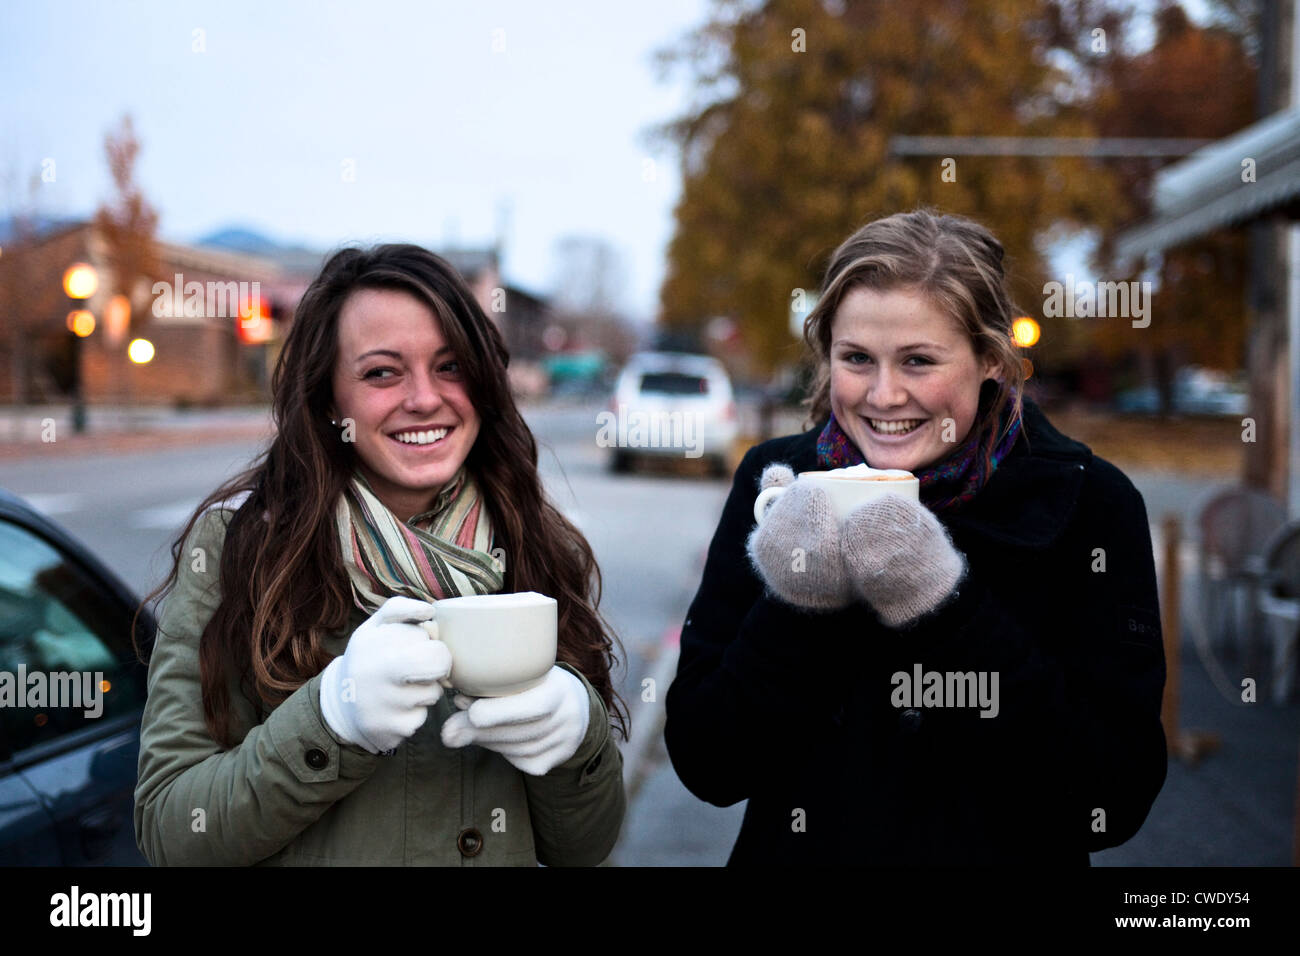 Two athletic young women smiling drink coffee in the early morning in Idaho. Stock Photo